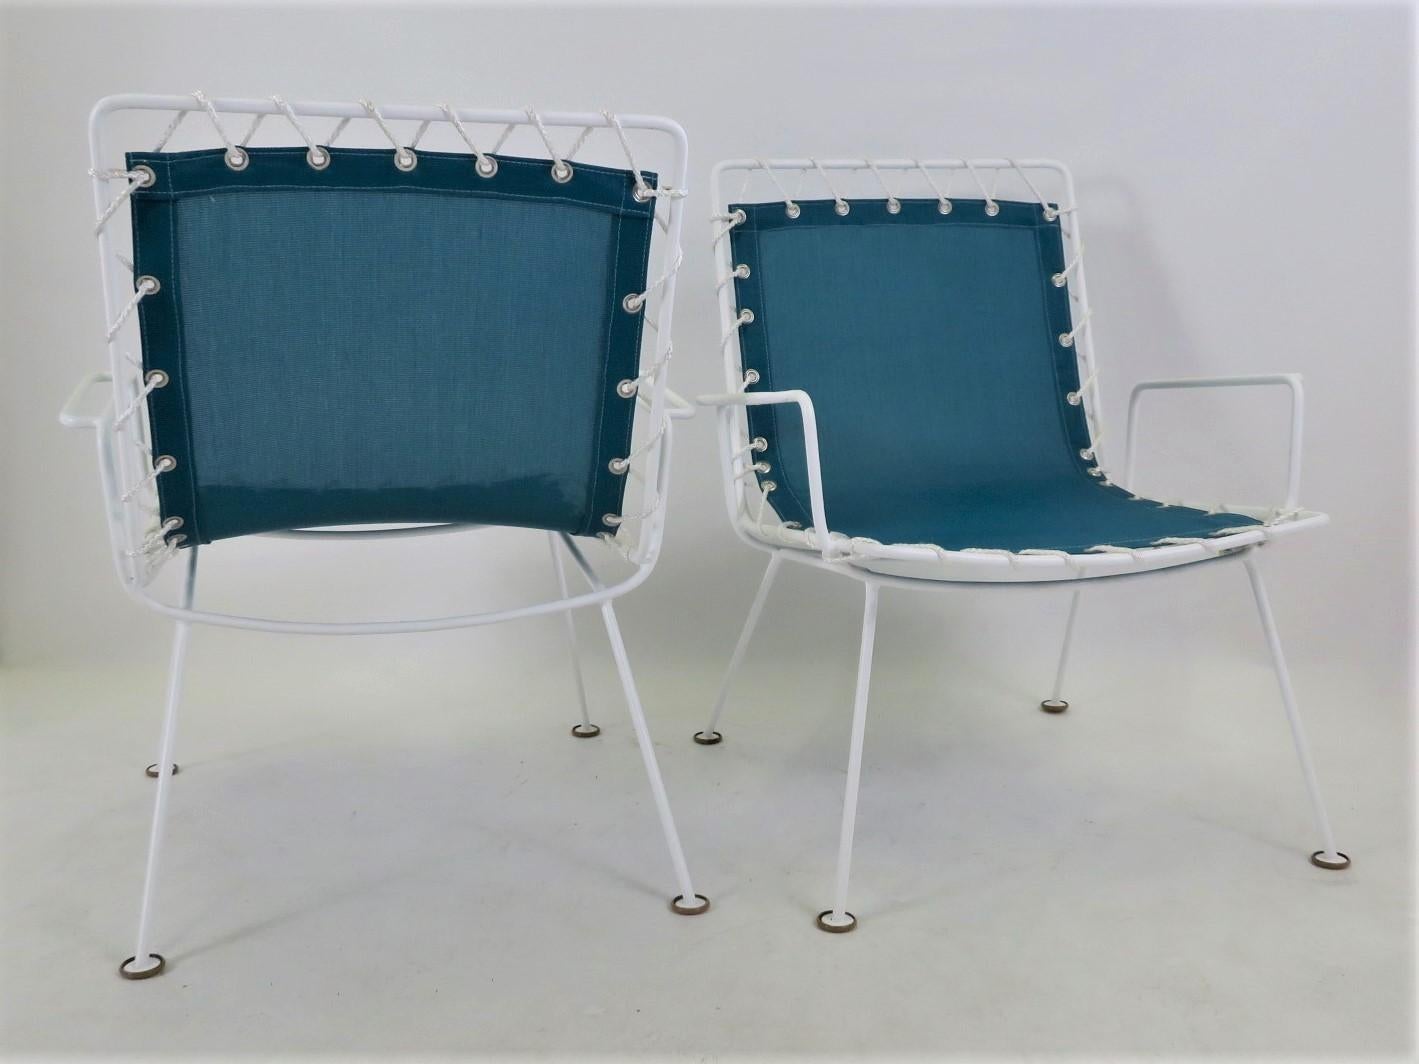 American Pipsan Saarinen Swanson Sol Air Set of 4 Outdoor Chairs 1950s Ficks Reed Co.